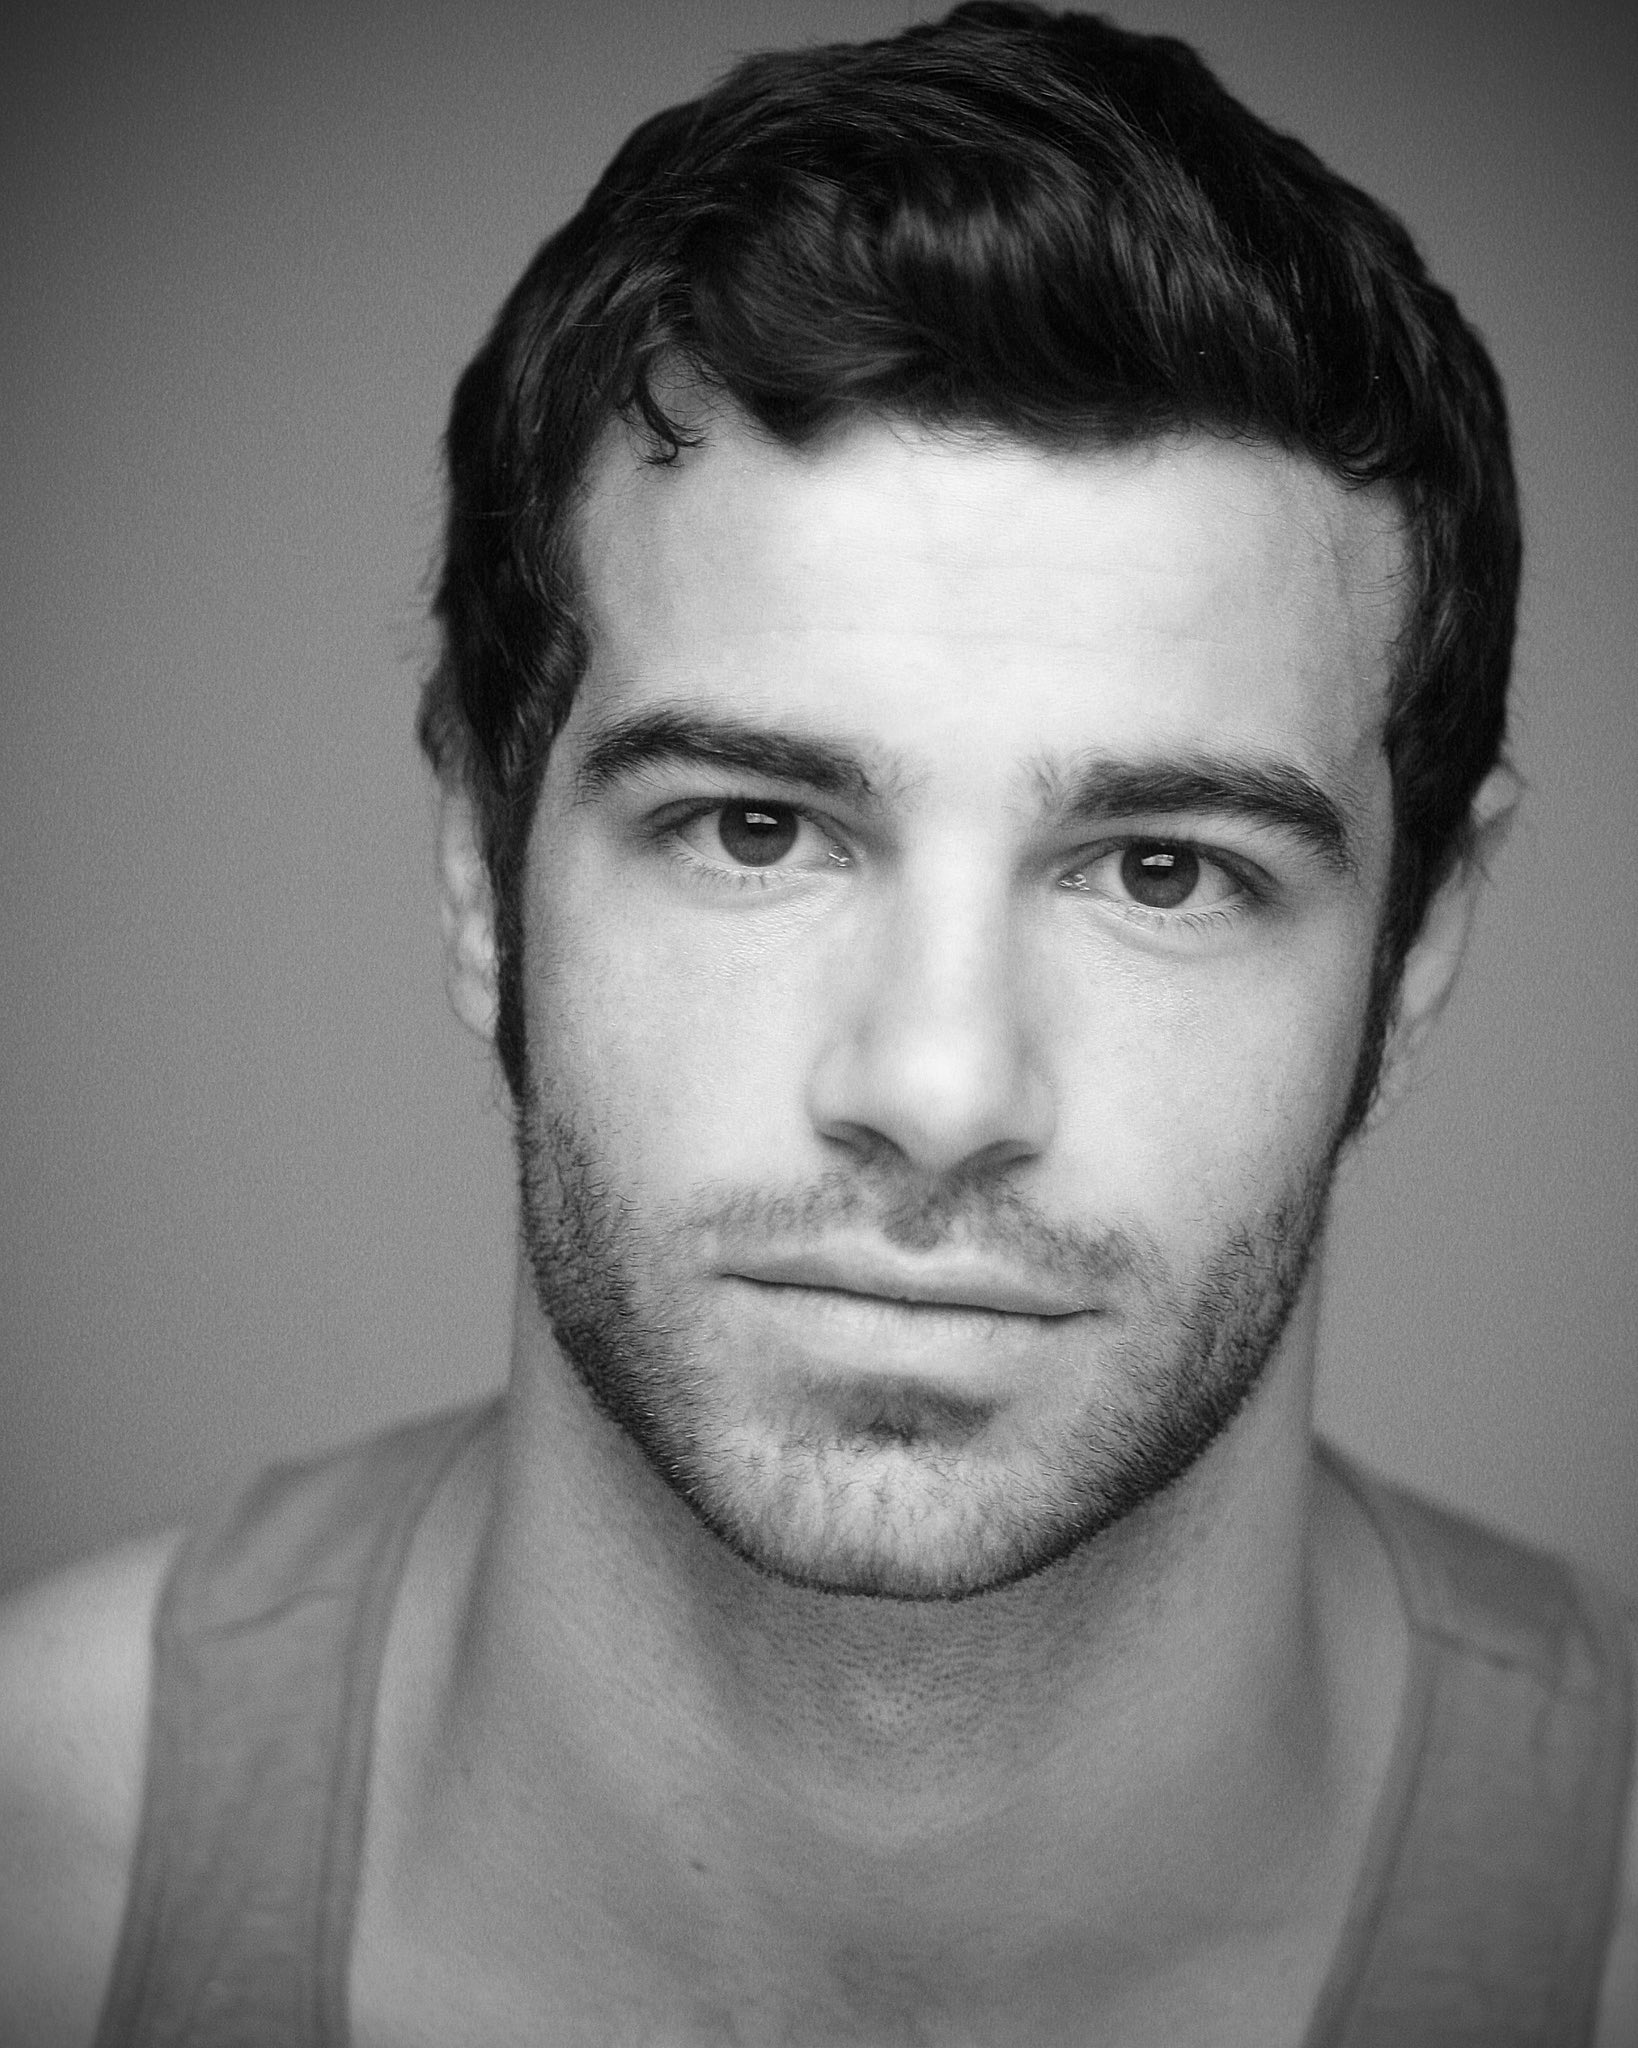 A headshot of the actor Ben Starr